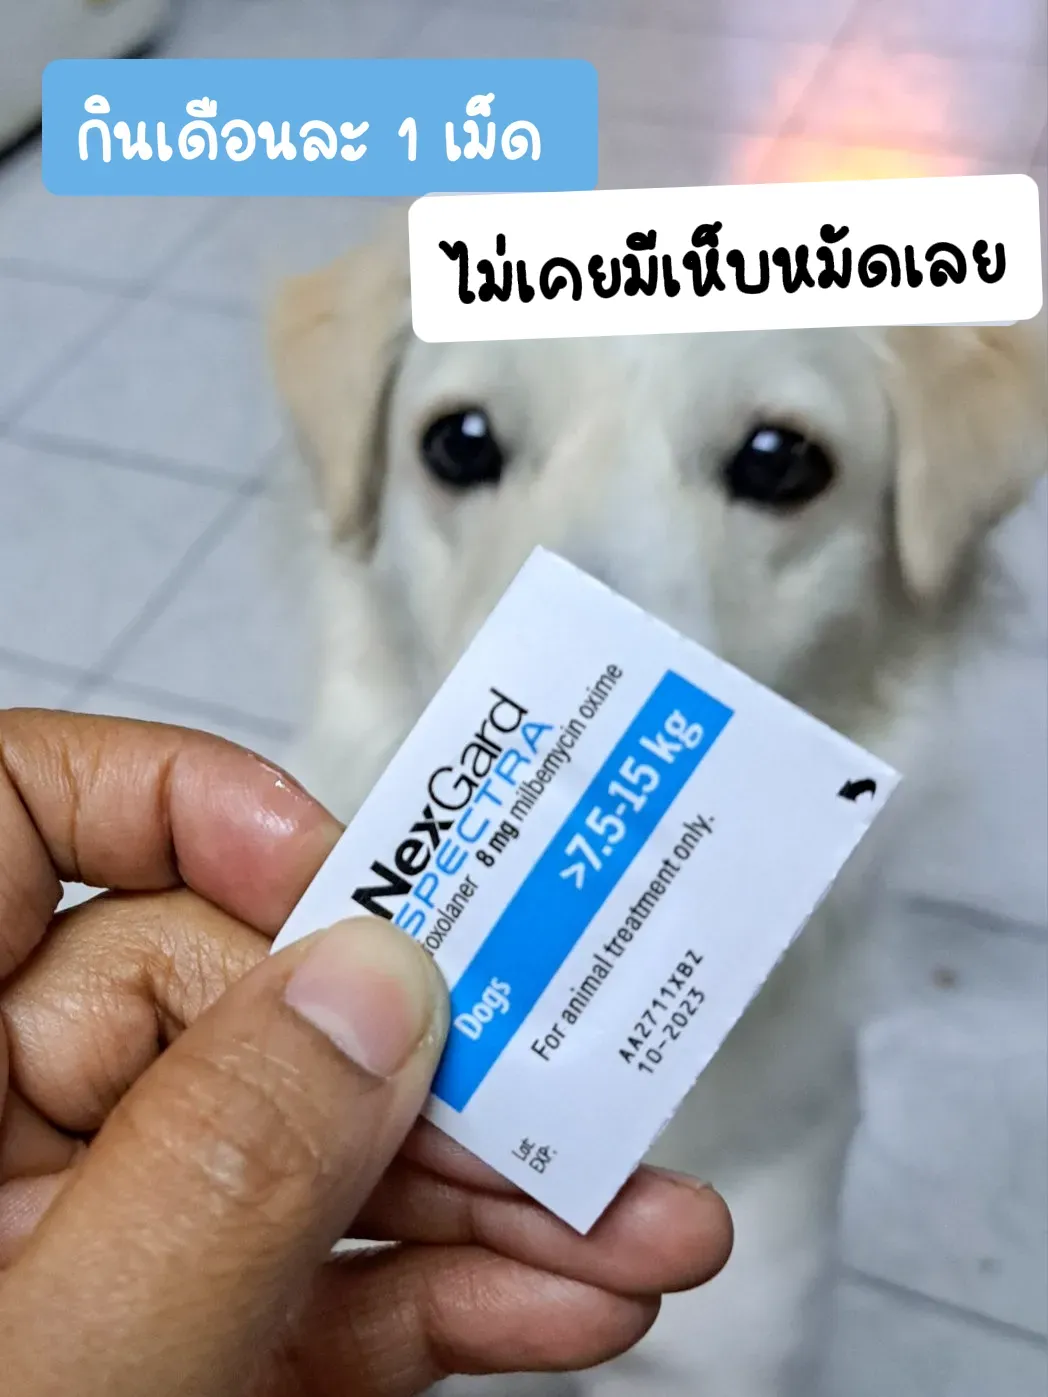 Nexgard Spectra Dog Sister Flea Tick Remover, Gallery posted by CockneyAnn